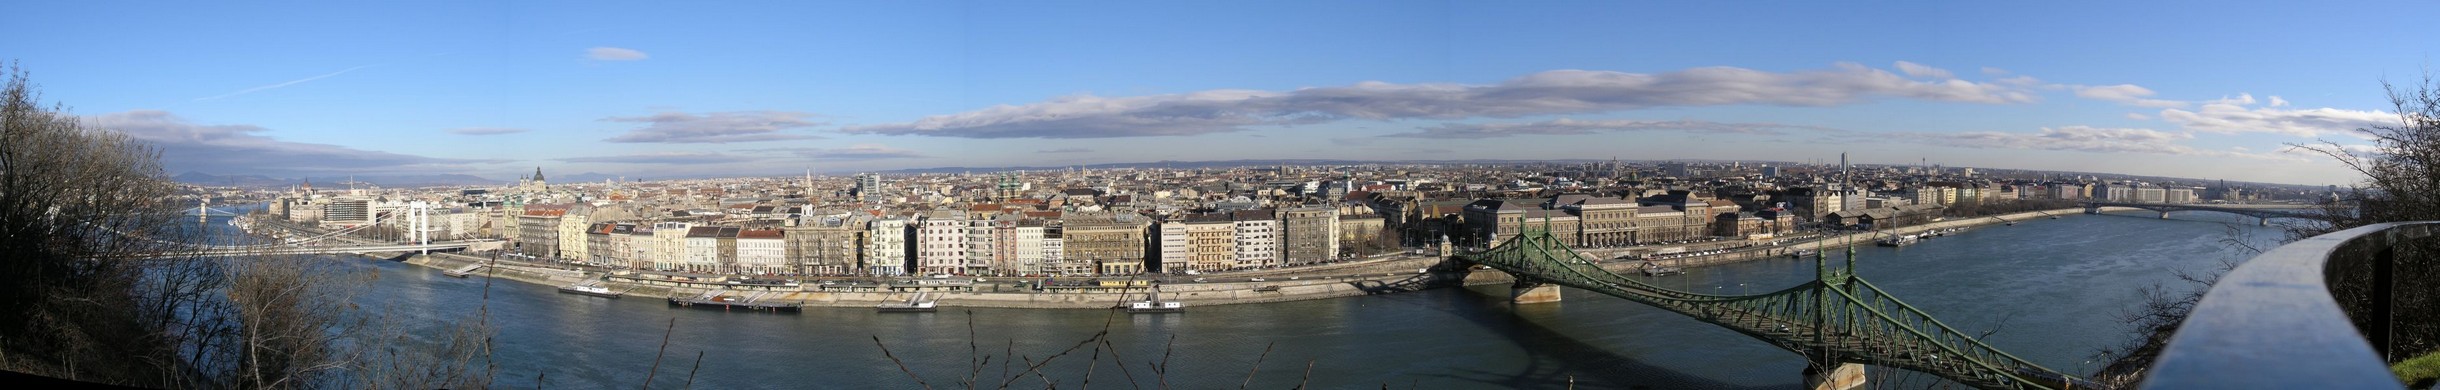 Panorama view of Budapest from Gellert Hill.